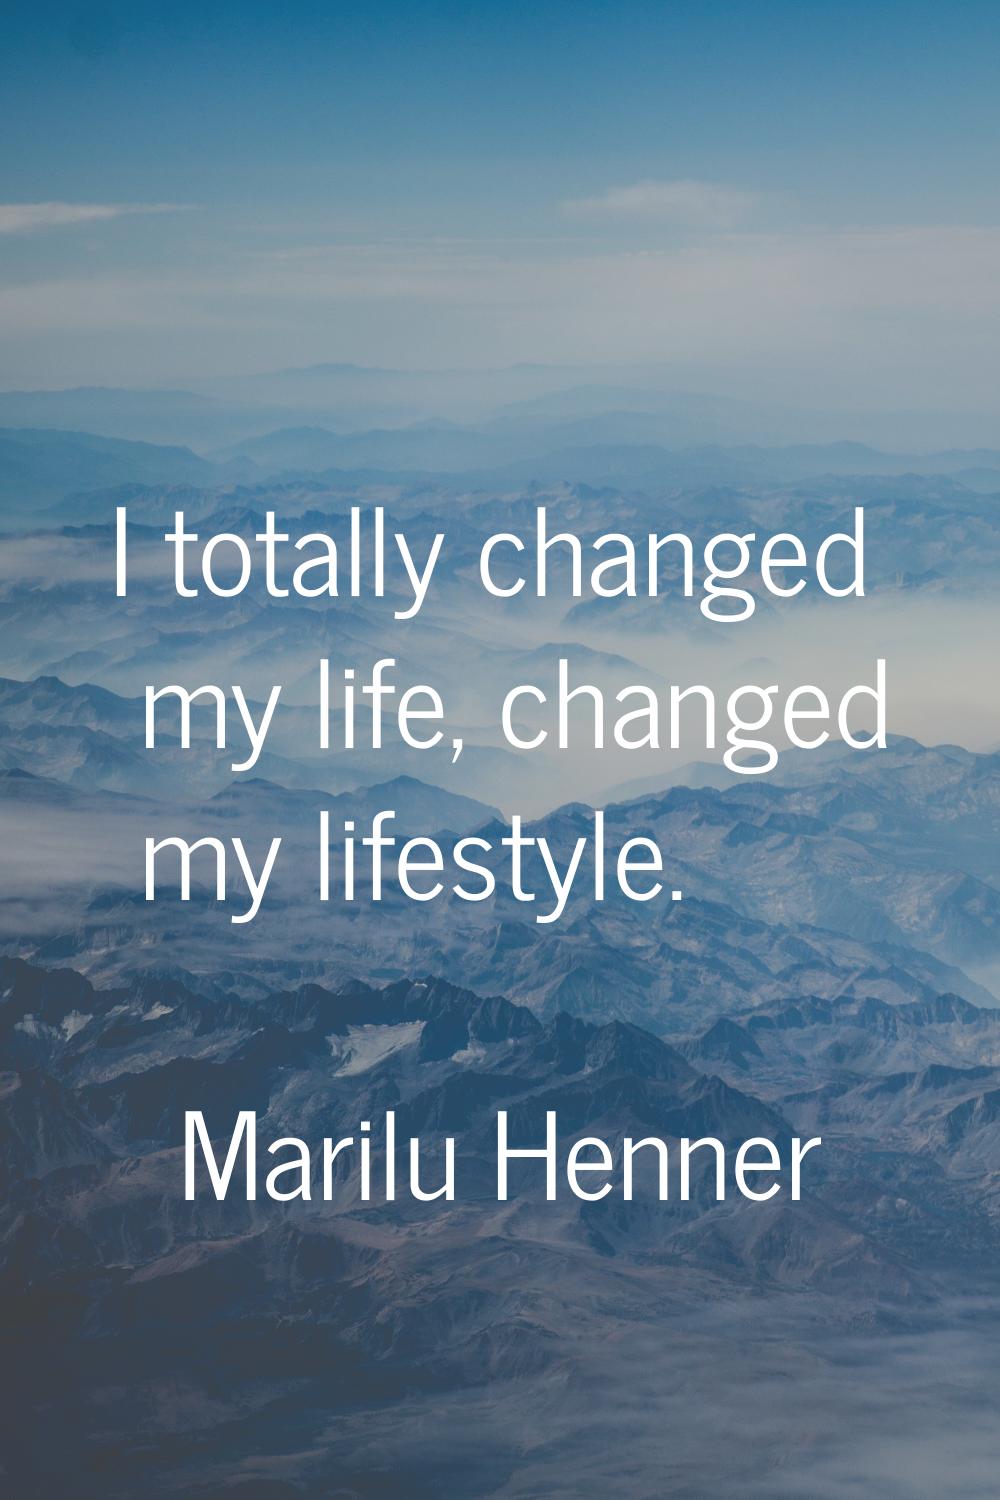 I totally changed my life, changed my lifestyle.